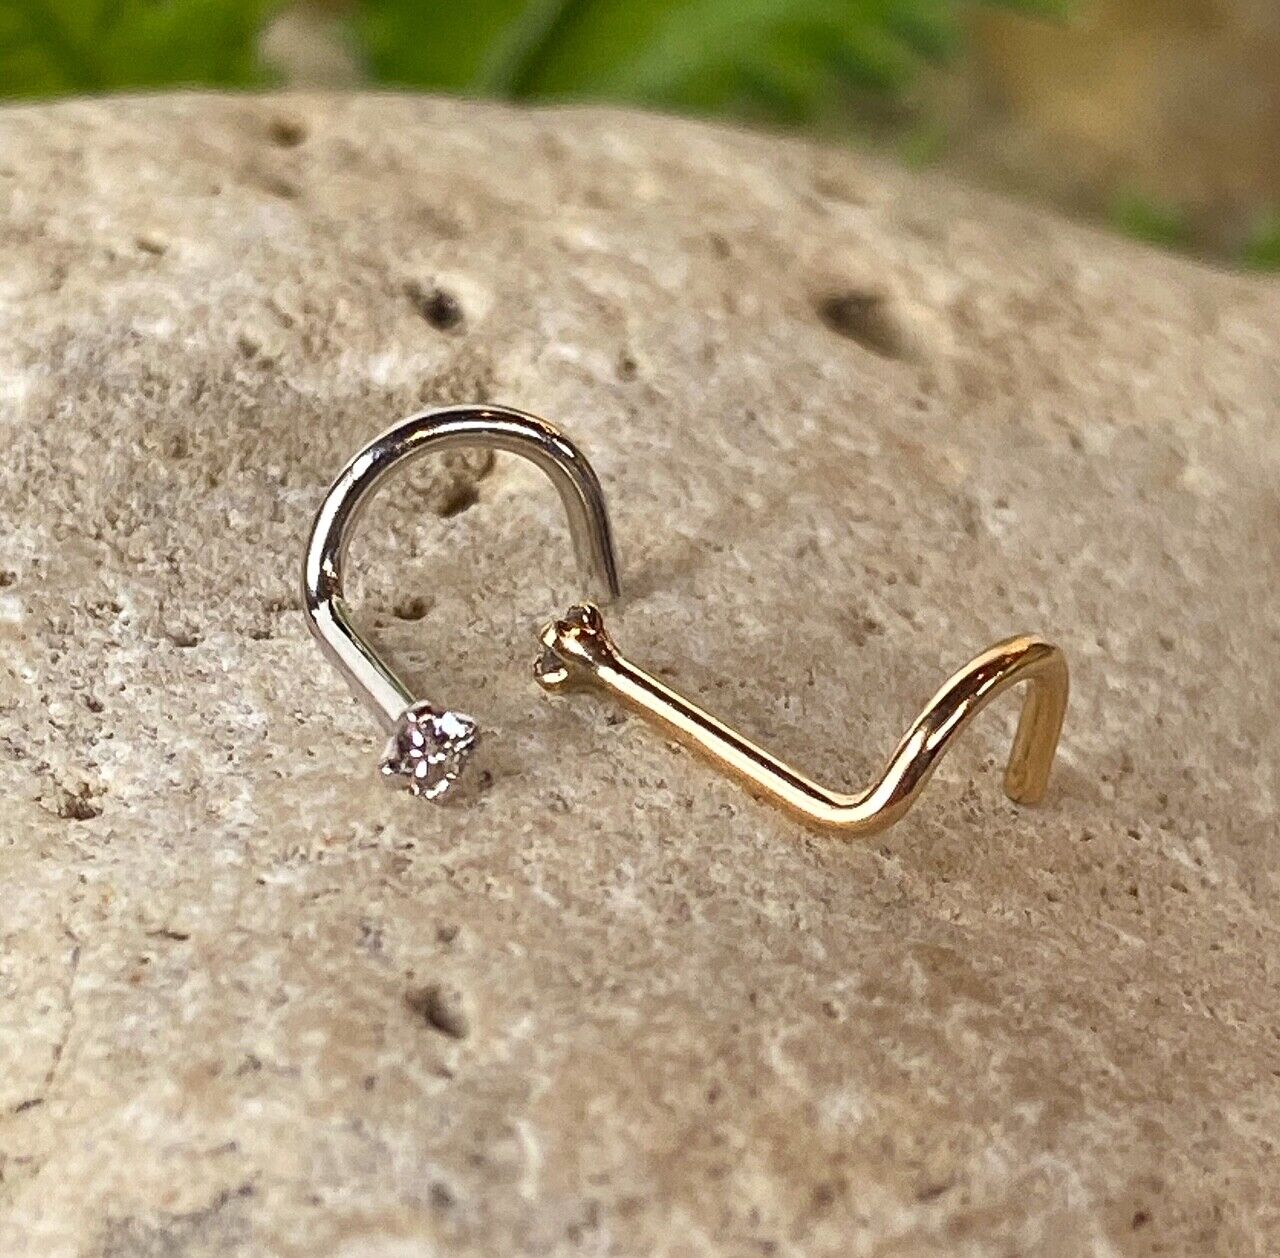 14kt Solid Gold 1.5mm Diamond Nose Ring 20g 20 gauge stud or screw white